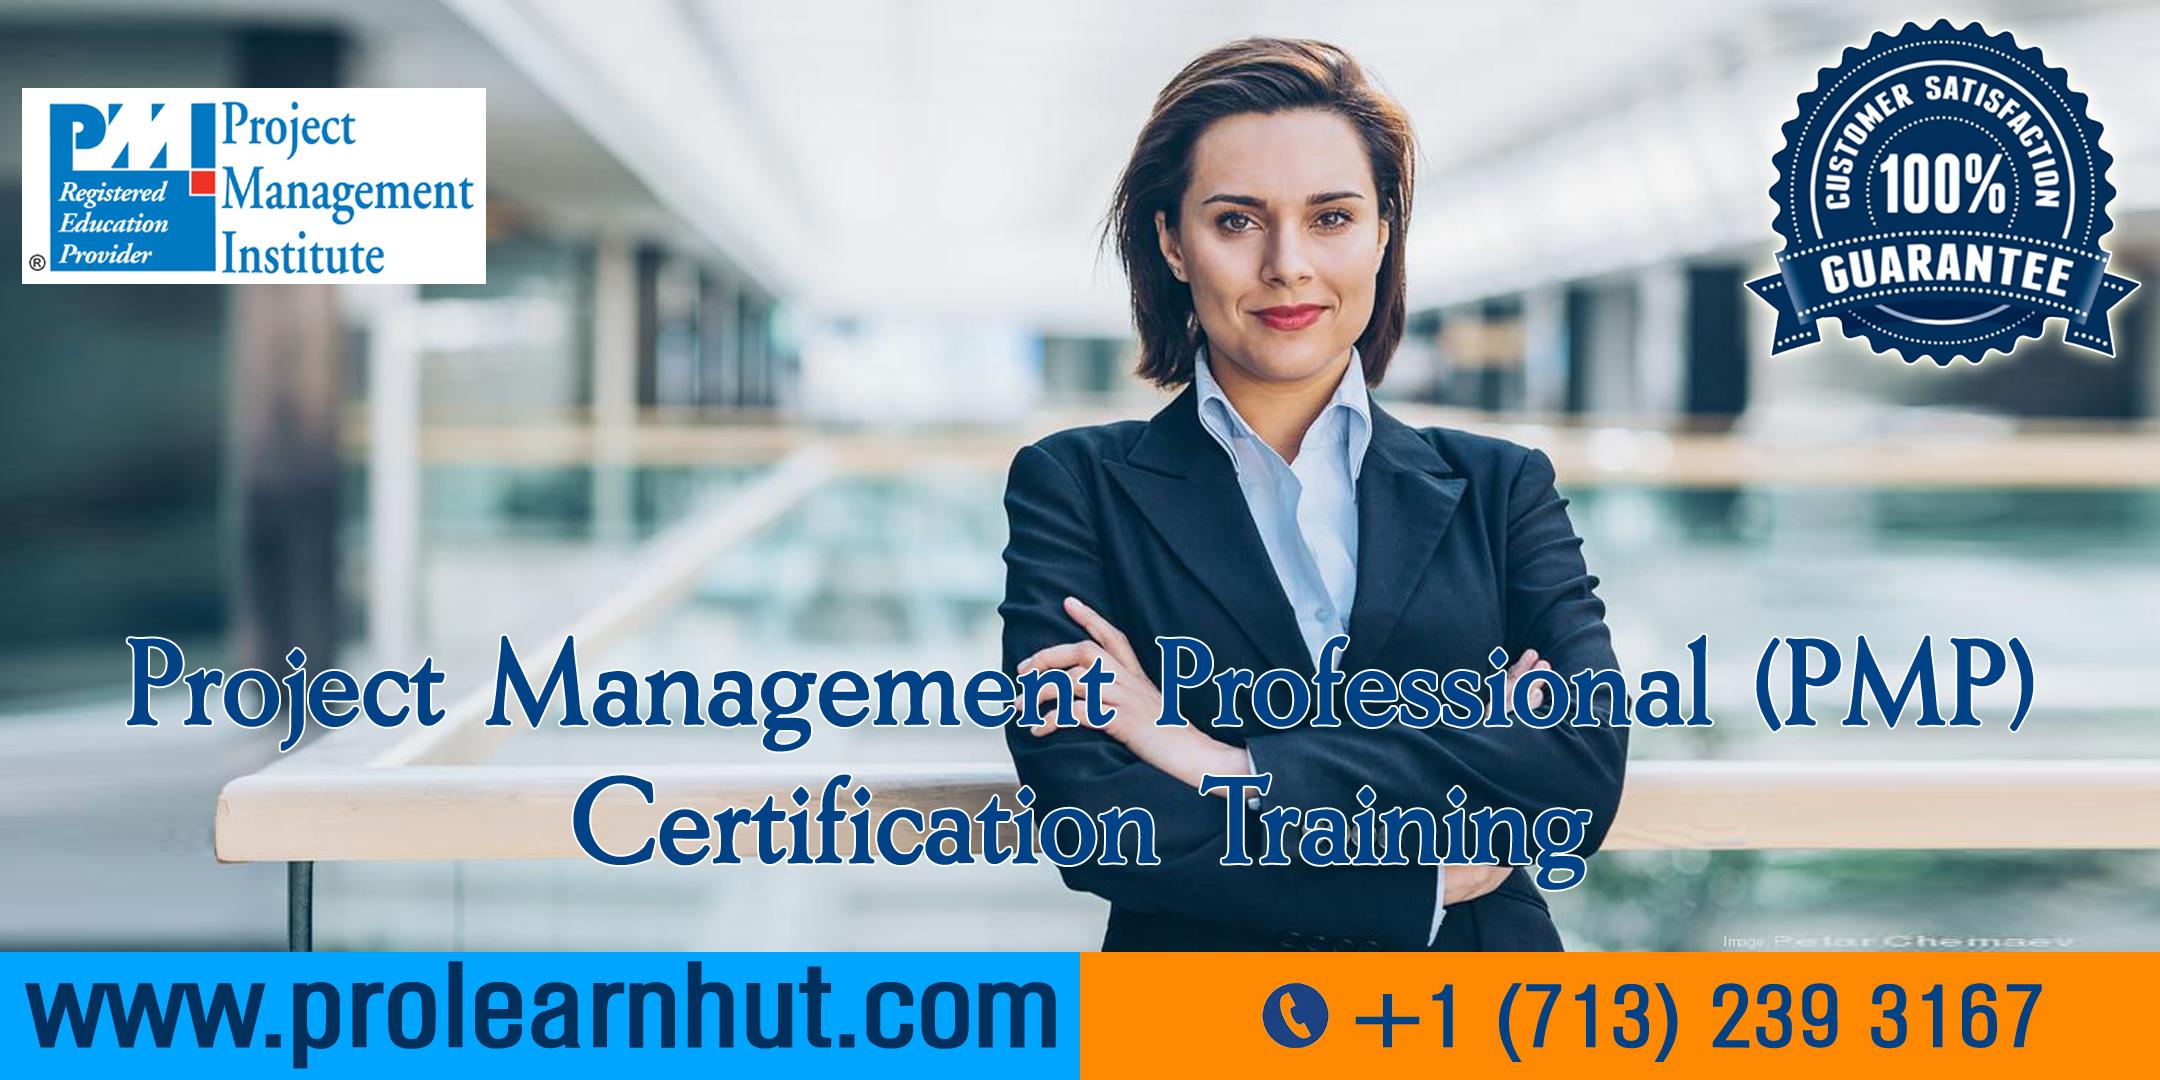 PMP Certification | Project Management Certification| PMP Training in Dallas, TX | ProLearnHut